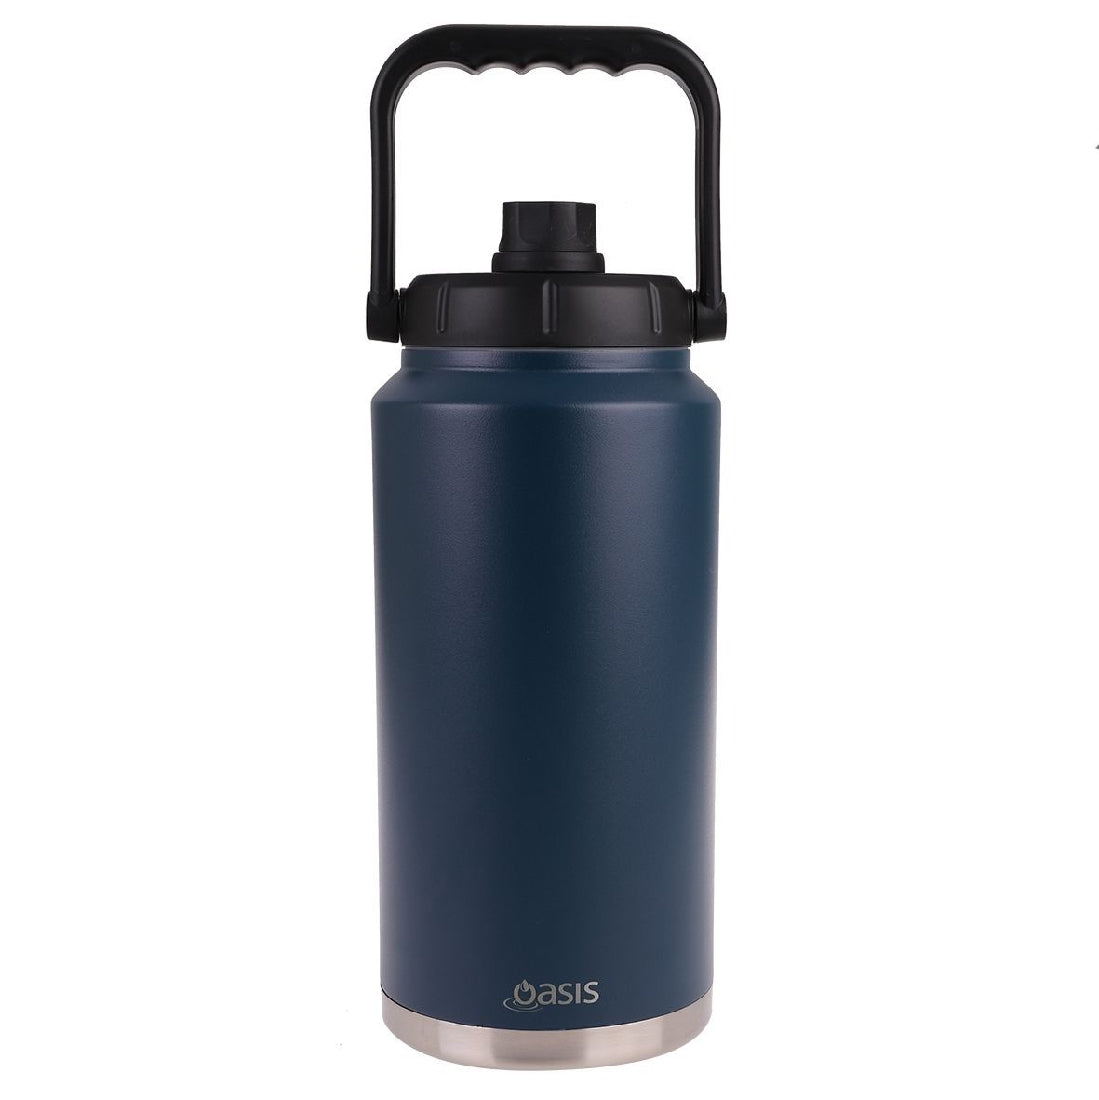 Oasis S/s Insulated Jug W/ Carry Handle 3.8l Navy